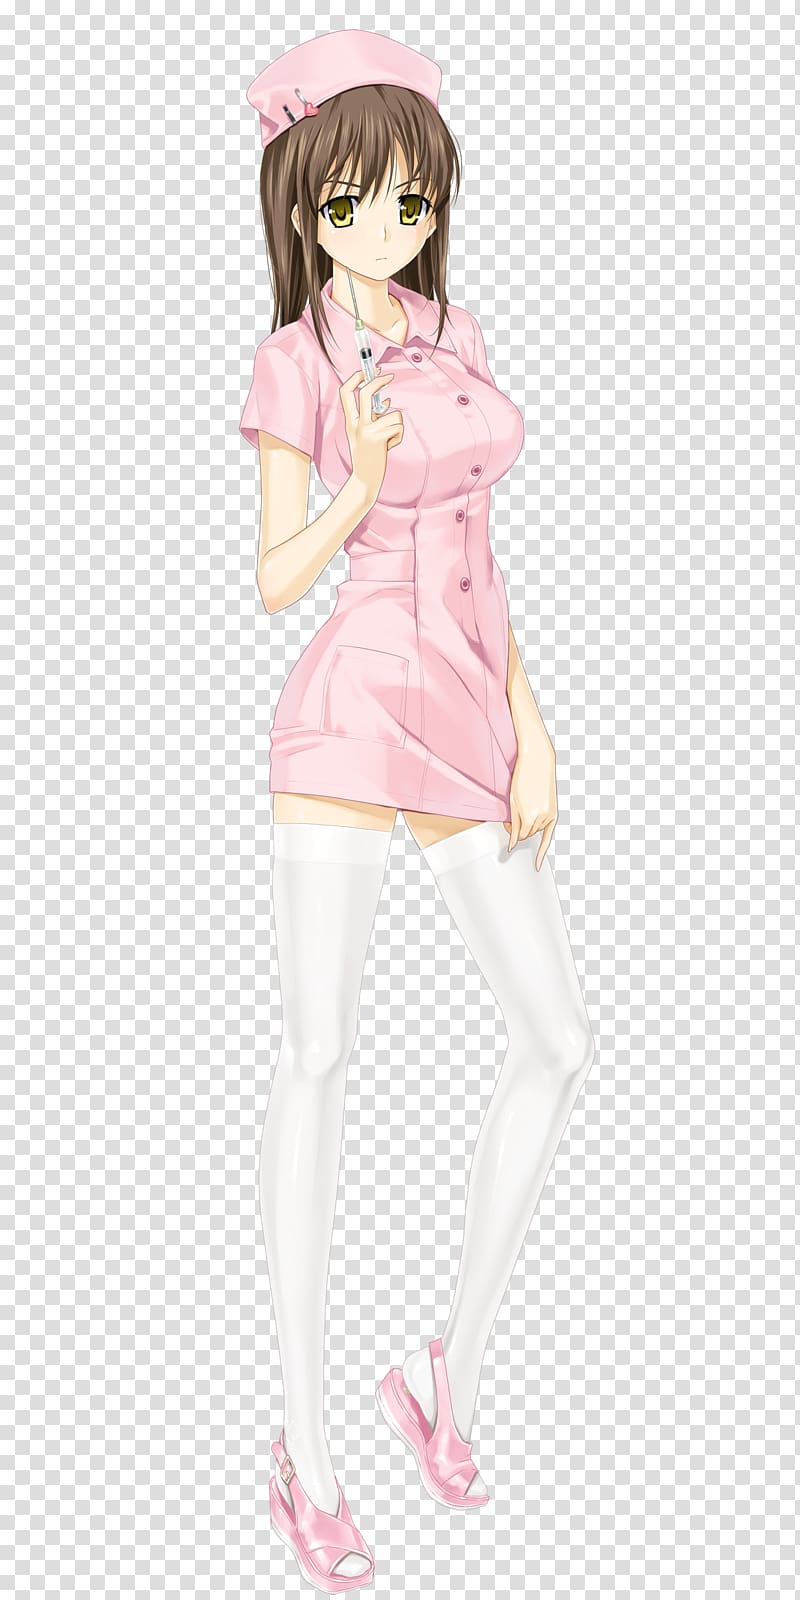 Dakimakura Anime Master of Martial Hearts Thigh Flank, Anime transparent background PNG clipart